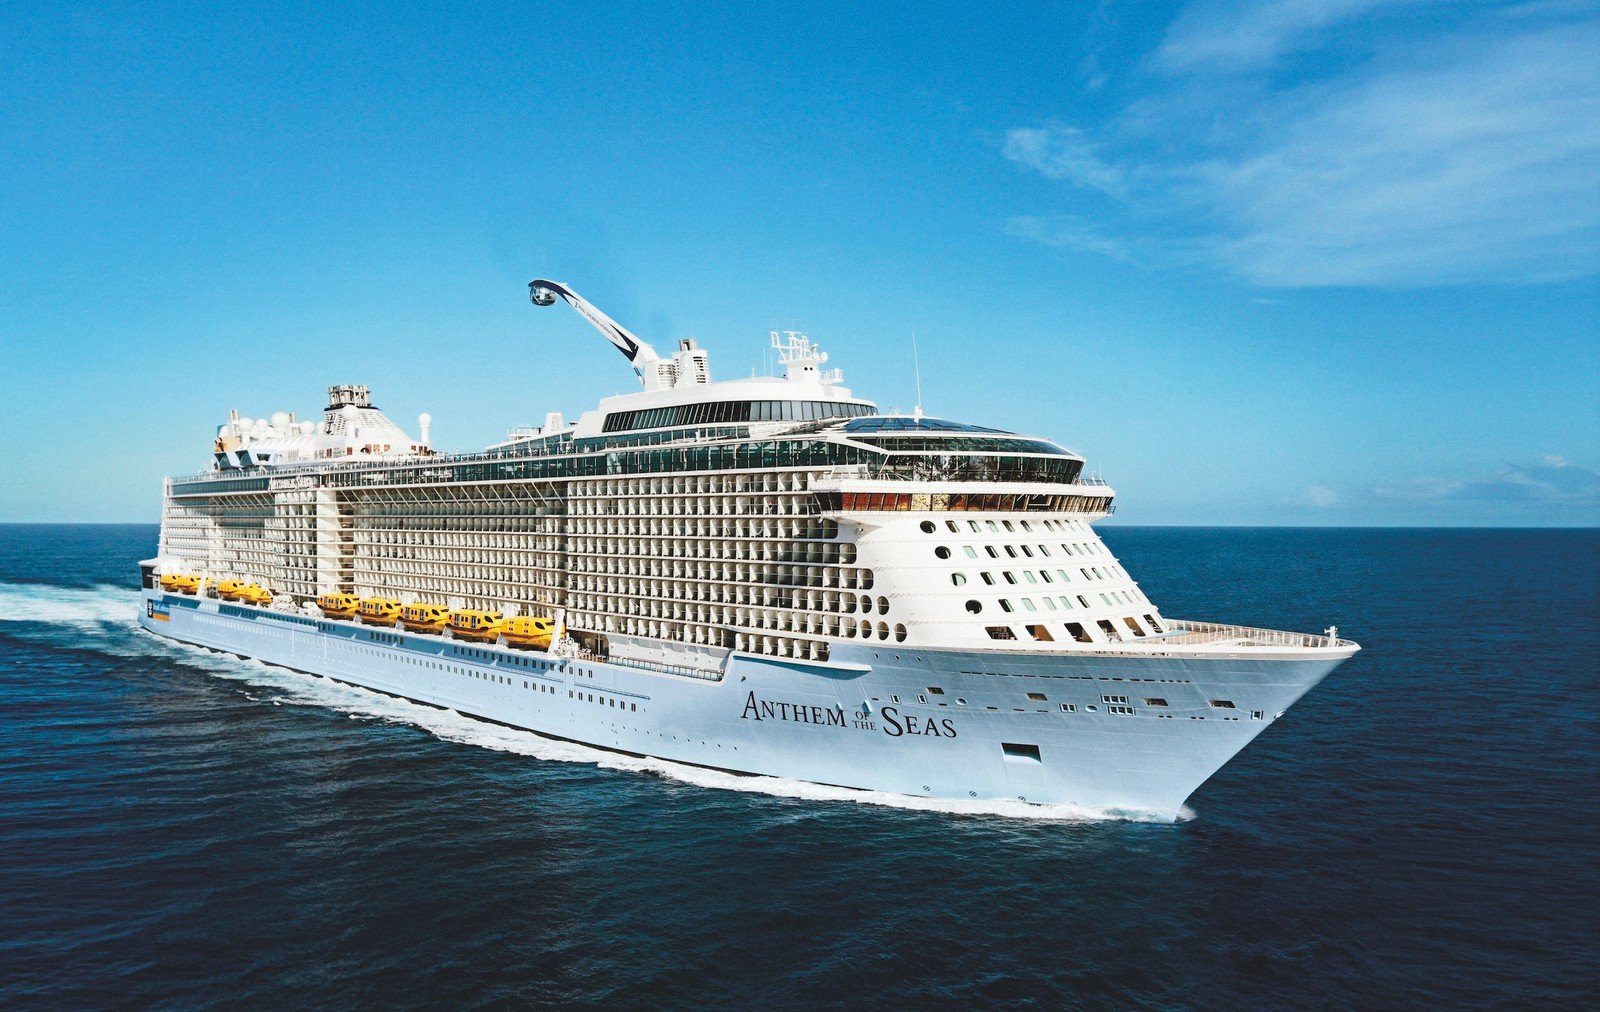 New Anthem of the Seas summer 2021 cruises from UK available to book now | Royal Caribbean Blog